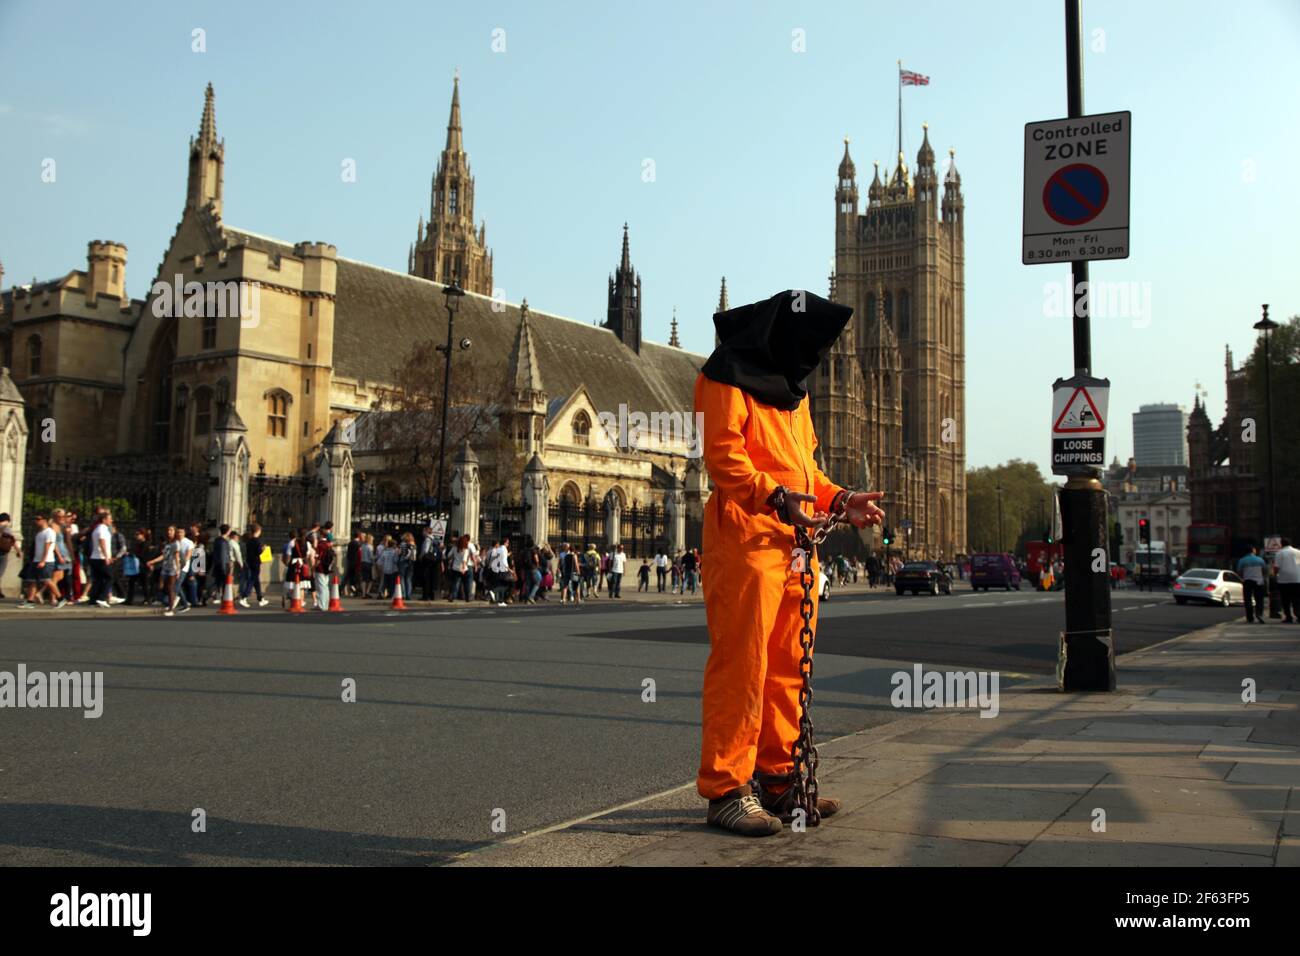 21 April 2011. London, England. A Guantanamo Bay protestor stands outside Big Ben and the Houses of Parliament, part of the Royal wedding route the pr Stock Photo